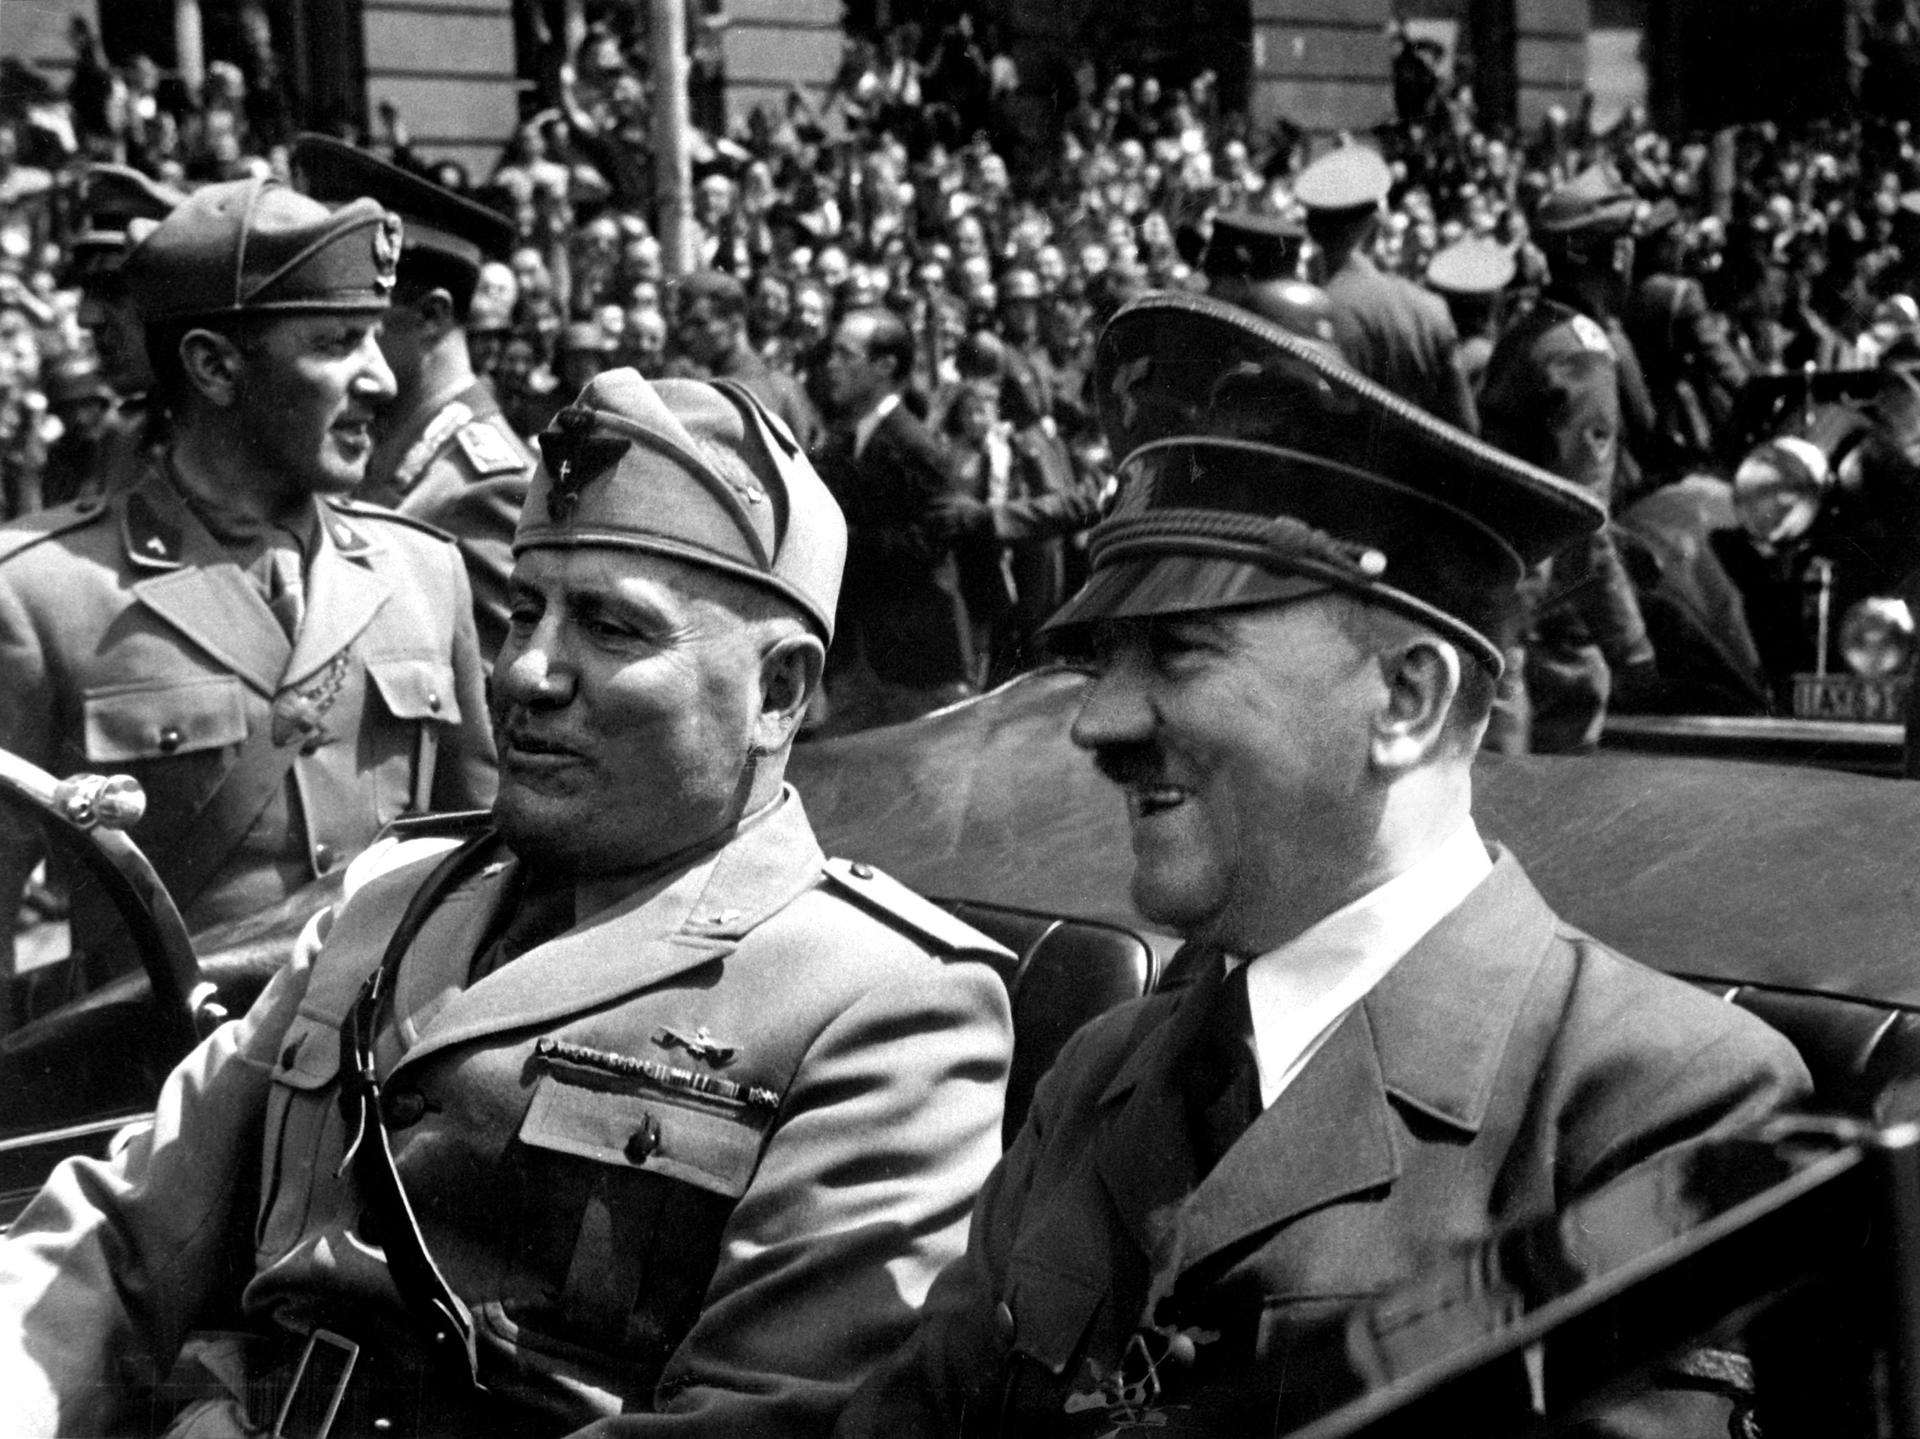 Benito Mussolini and Adolf Hitler in Munich, Germany.